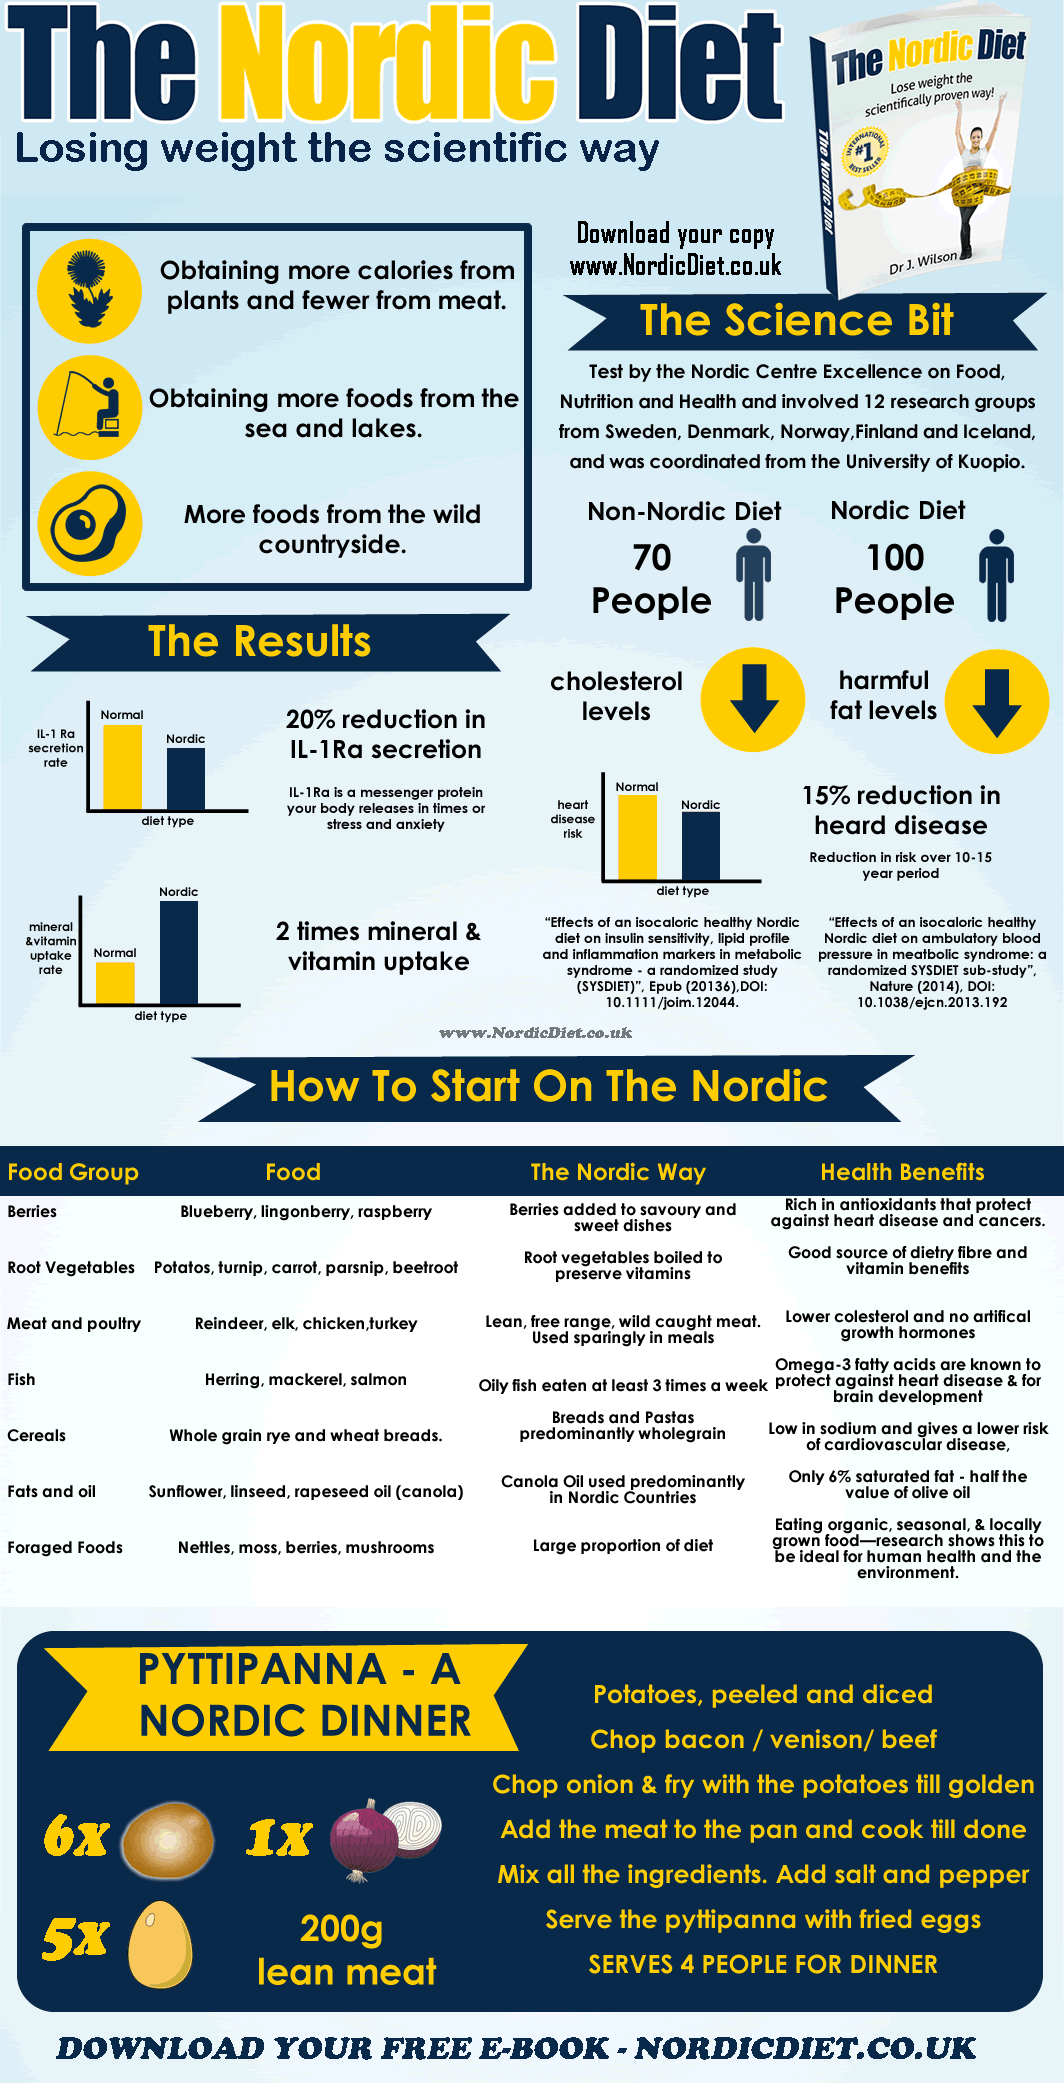 The New Nordic Diet -NordicDiet.co.uk Infographic